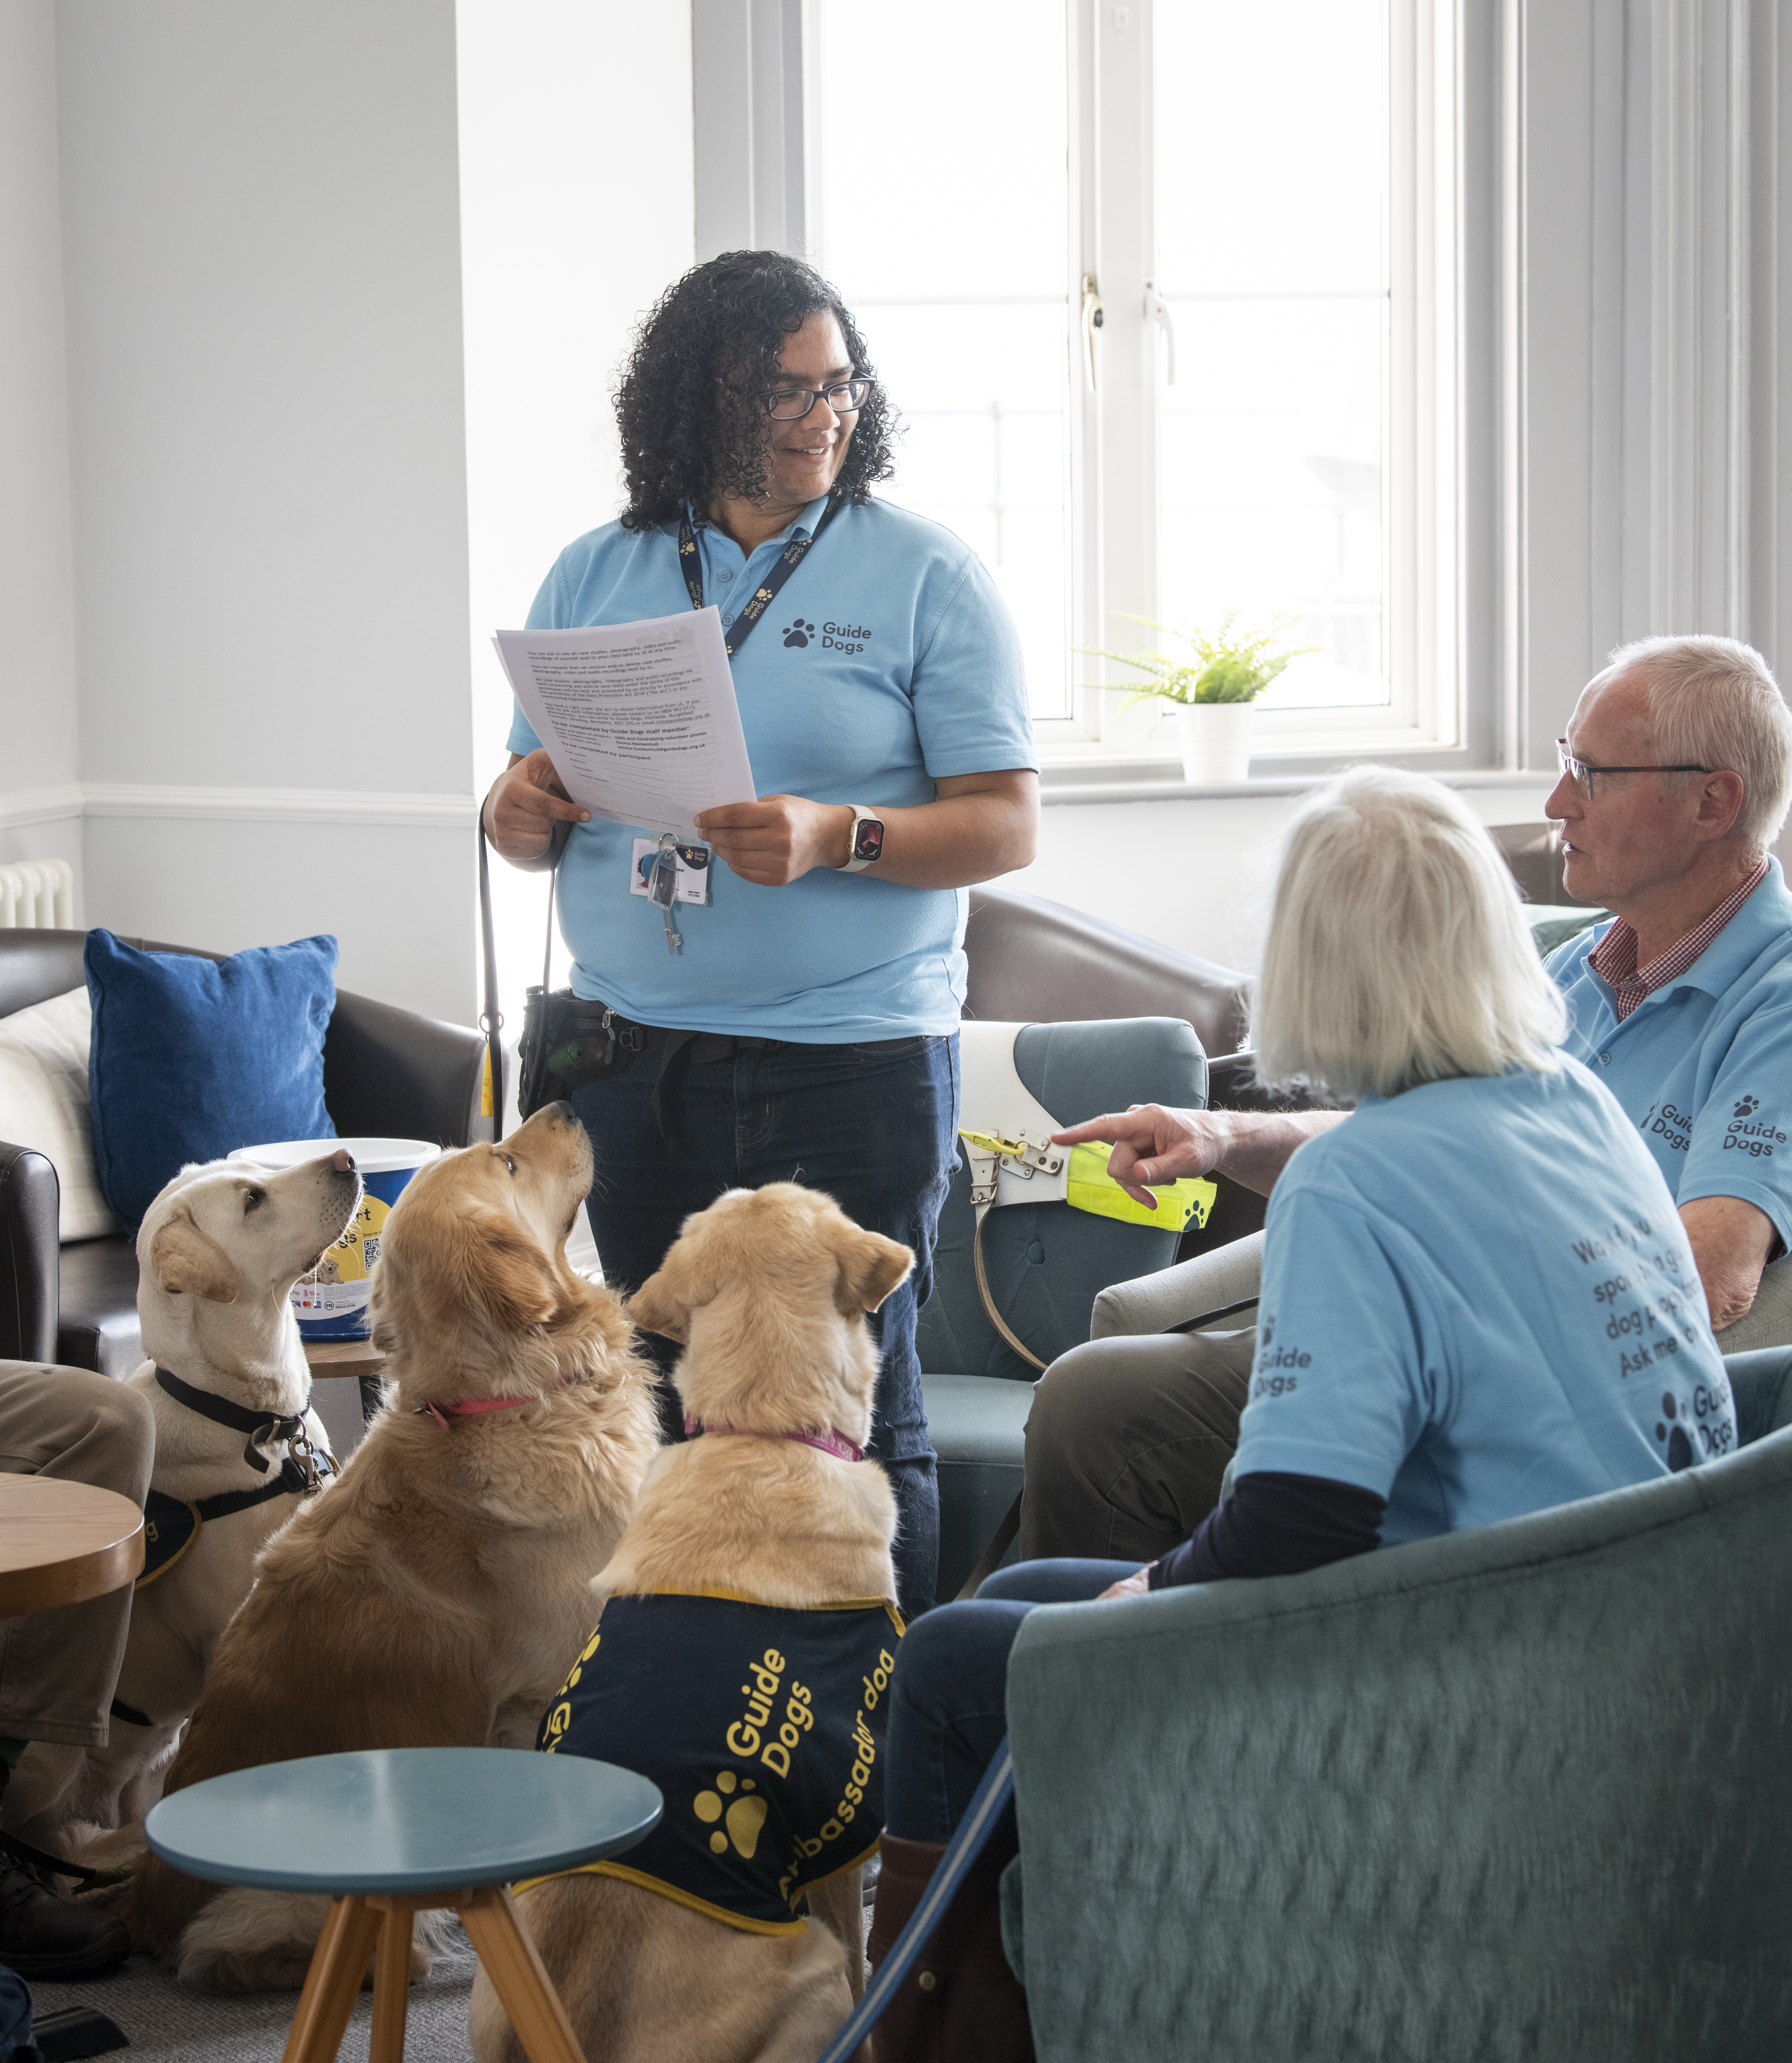 An image of a Fundraising Group Coordinator standing up and talking to their group, with 3 guide dogs looking up at them and listening intently. 